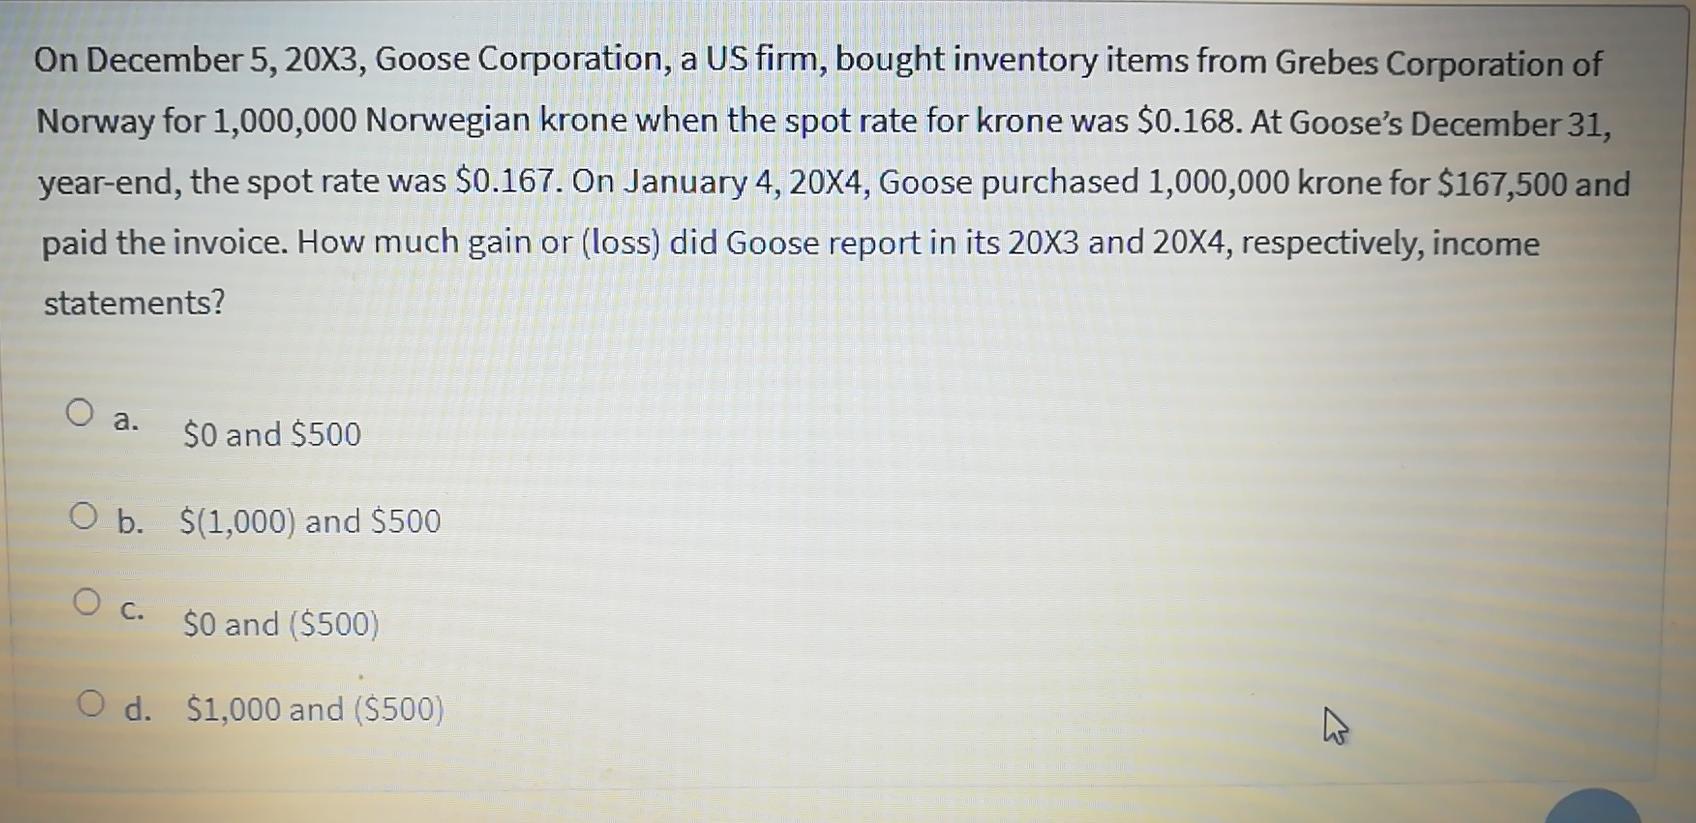 On December 5, 20X3, Goose Corporation, a US firm, bought inventory items from Grebes Corporation of Norway for 1,000,000 Nor